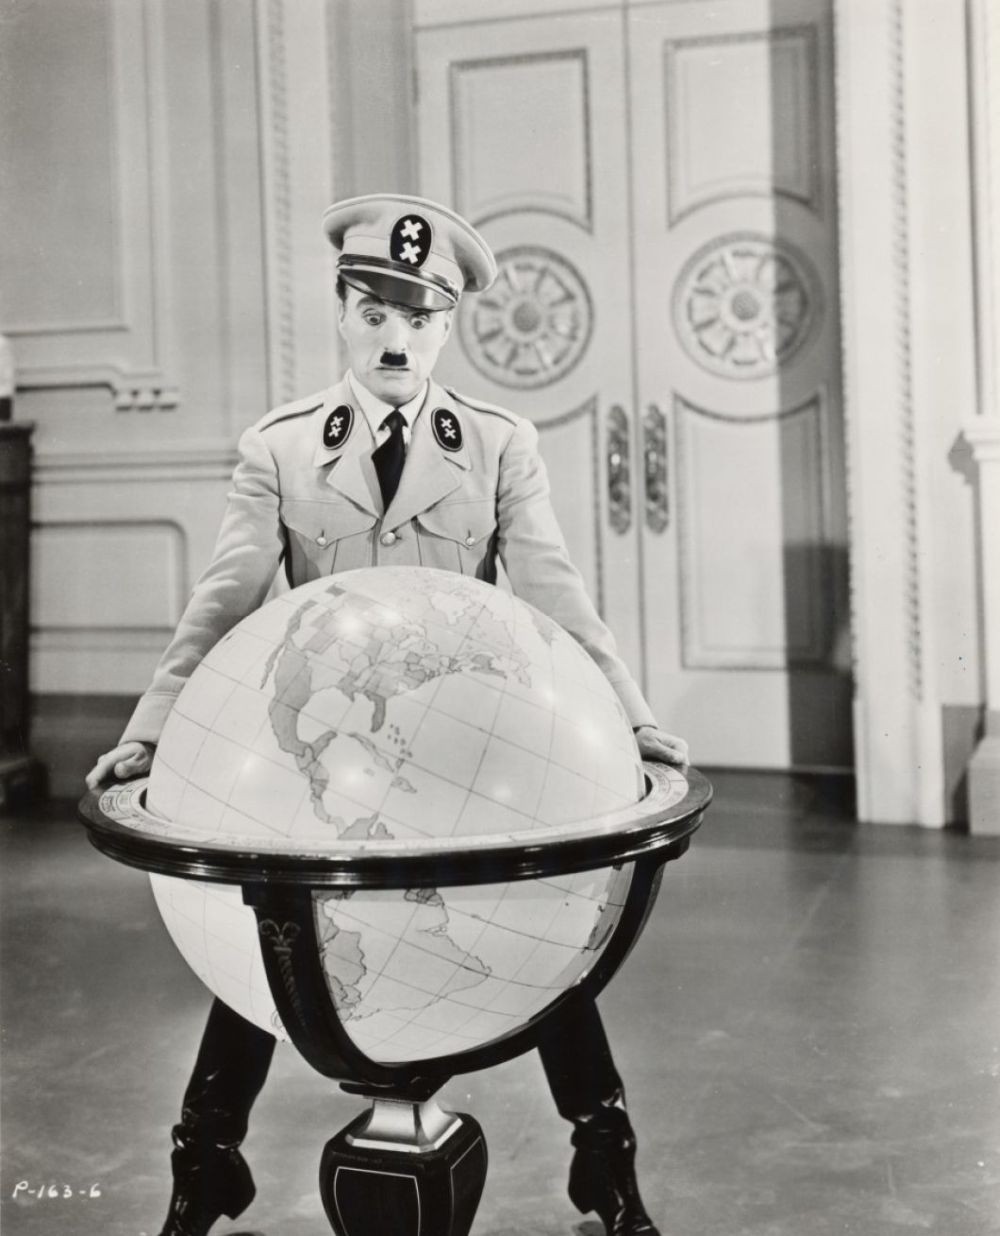 The Great Dictator, 1940, Charles Chaplin © Roy Export S.A.S